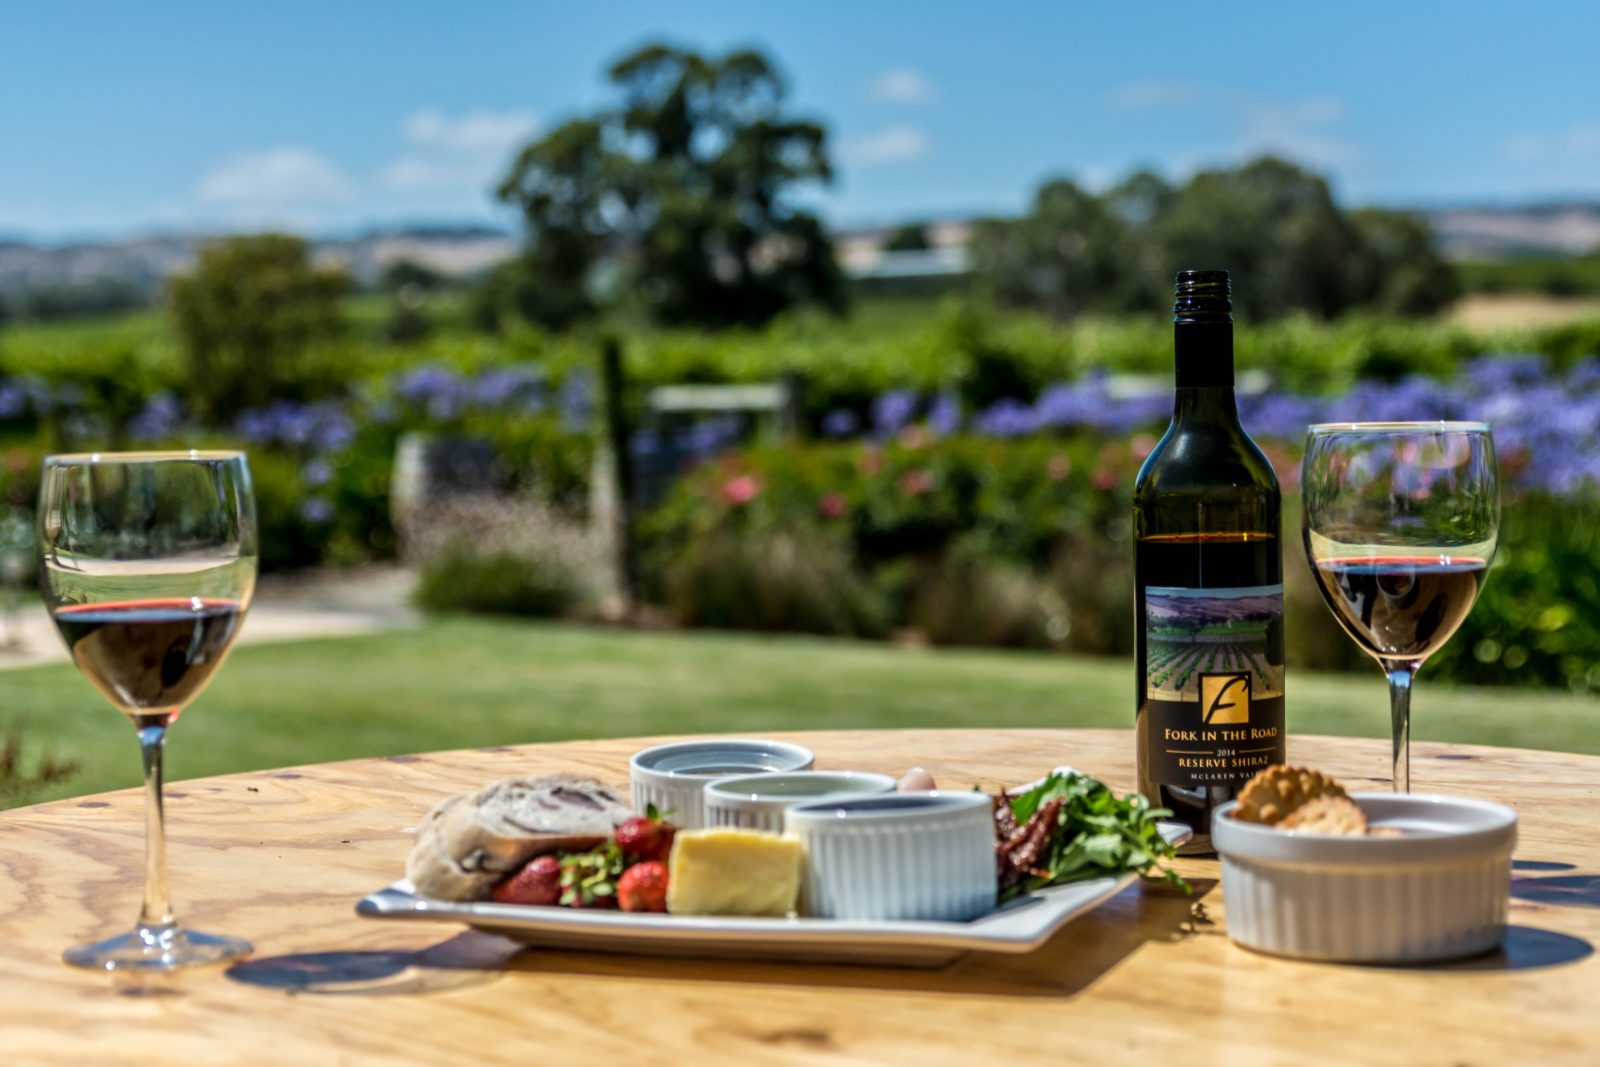 A bottle of our wine, with two glasses poured and one of our regional platters on offer.